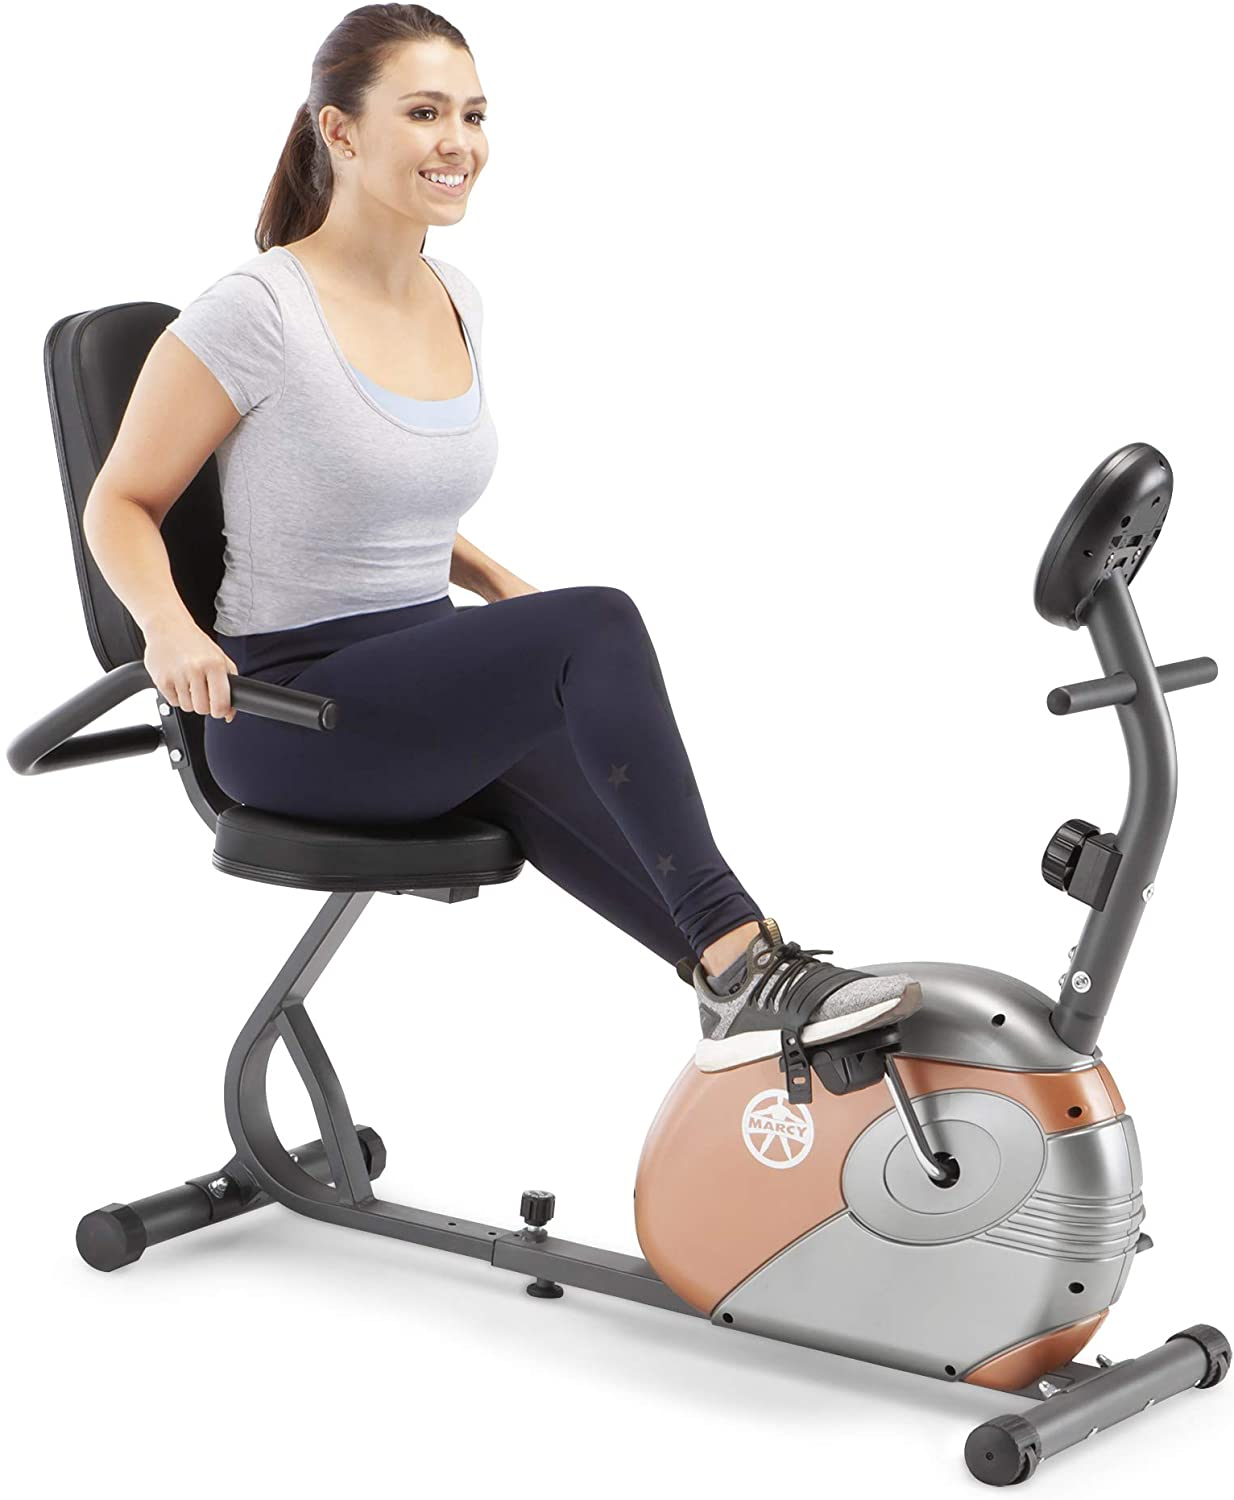 5- Marcy Recumbent Exercise Bike with Resistance.